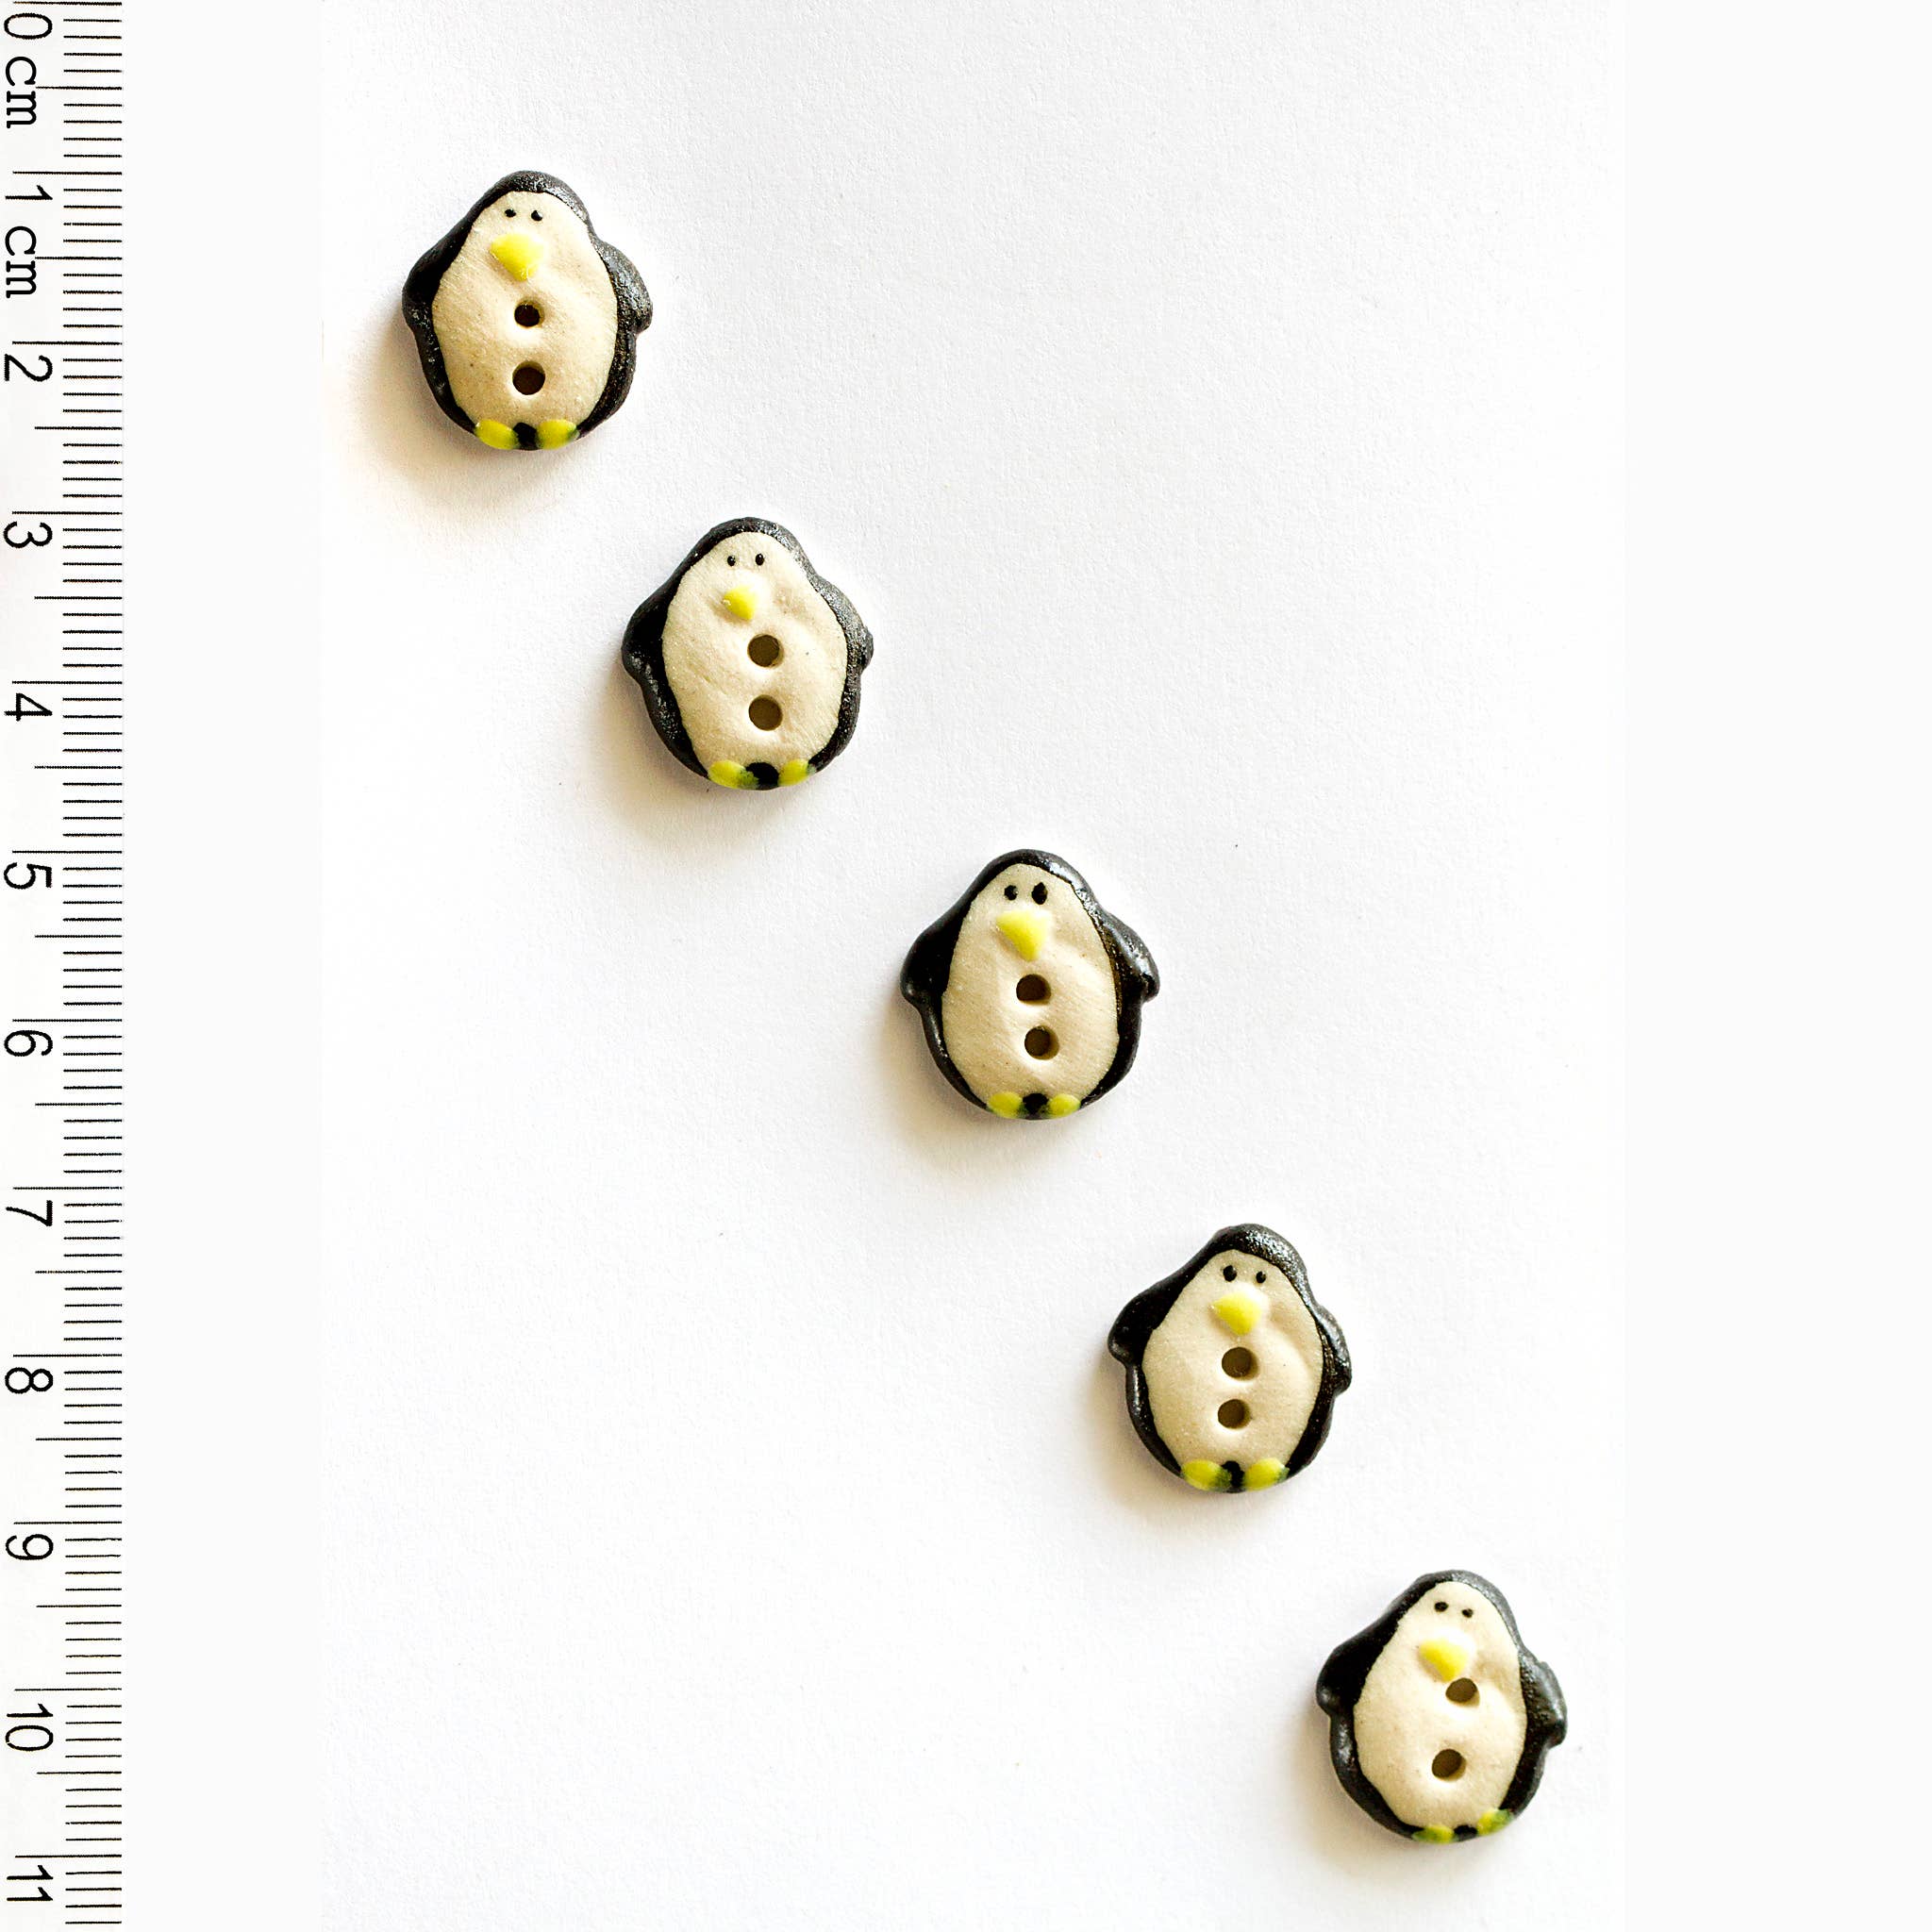 Incomparable Buttons - 5 Penguin Buttons